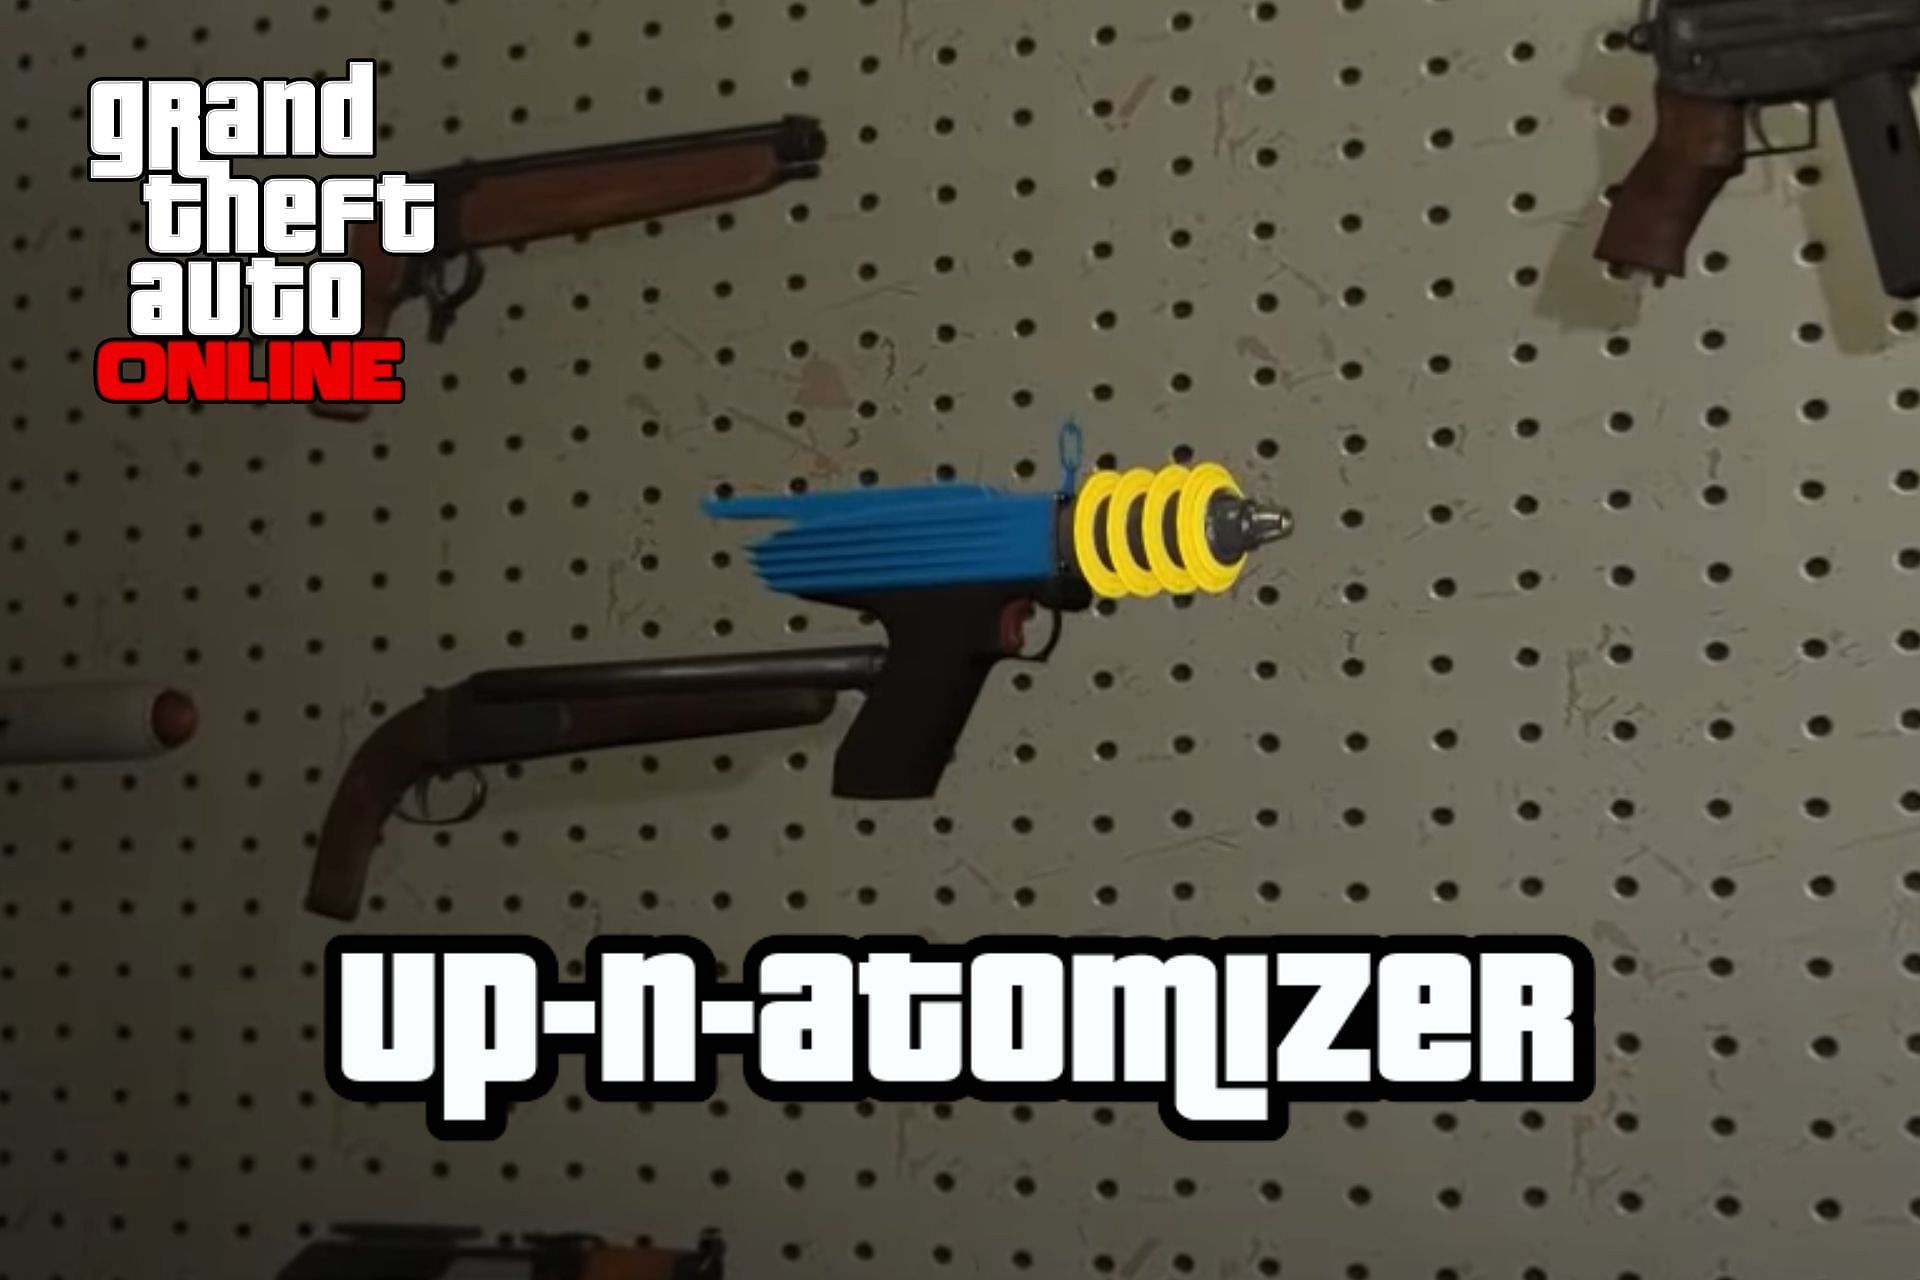 The Up-n-Atomizer is a must-have weapon in GTA Online (Image via Rockstar Games)